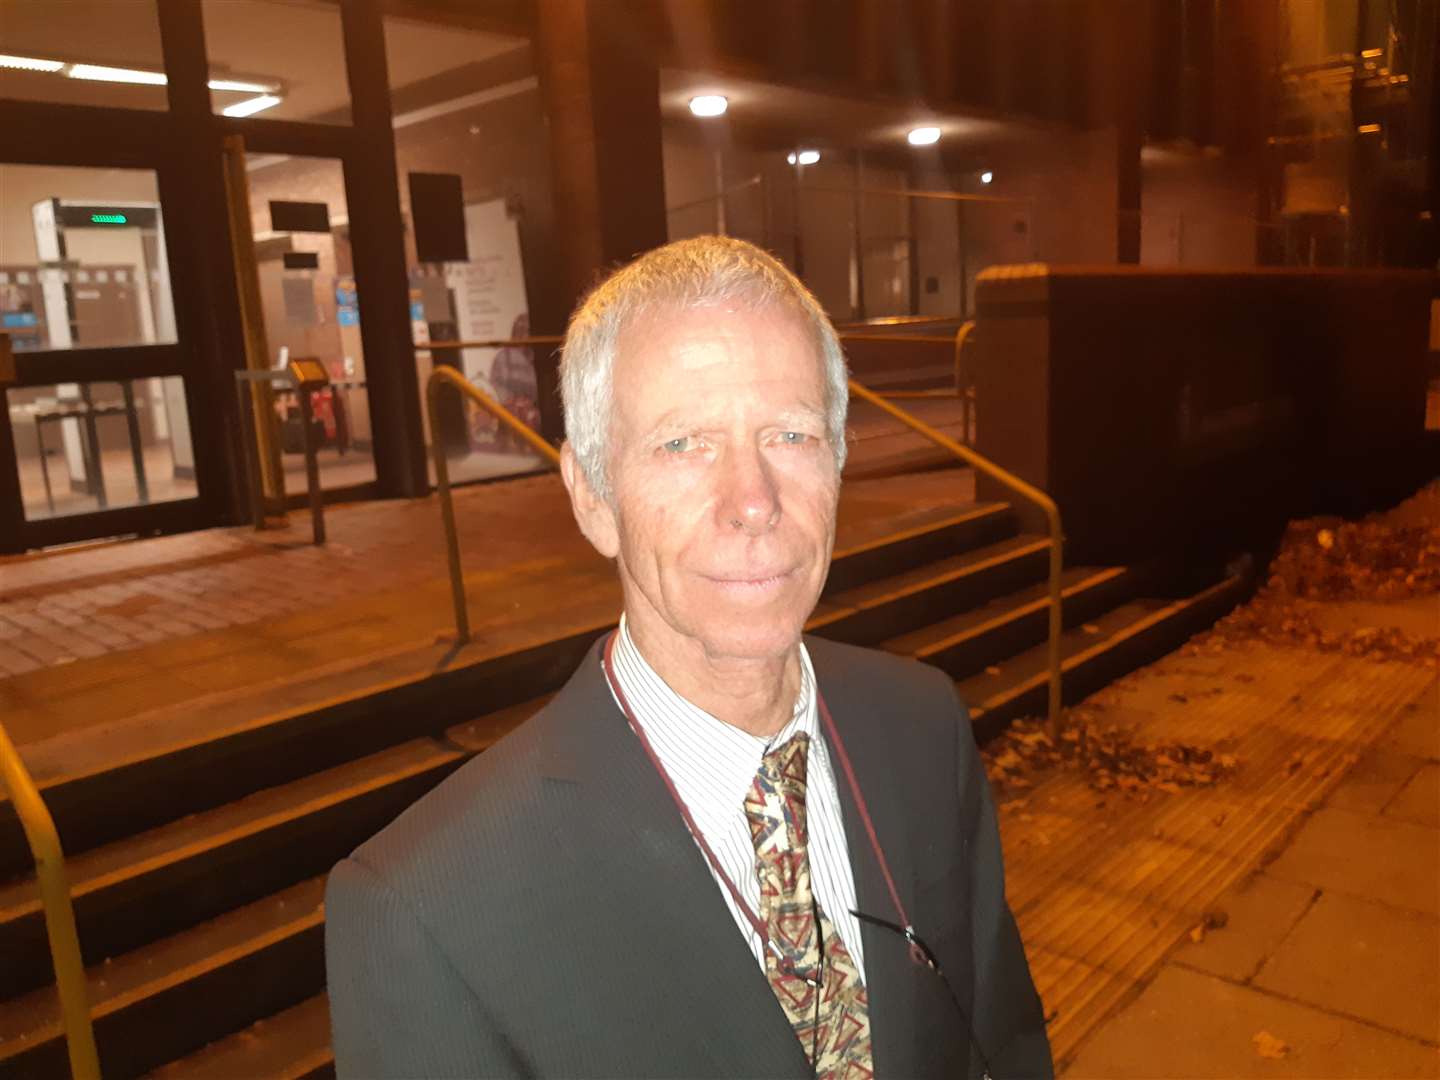 Ronald West outside court after his sentencing